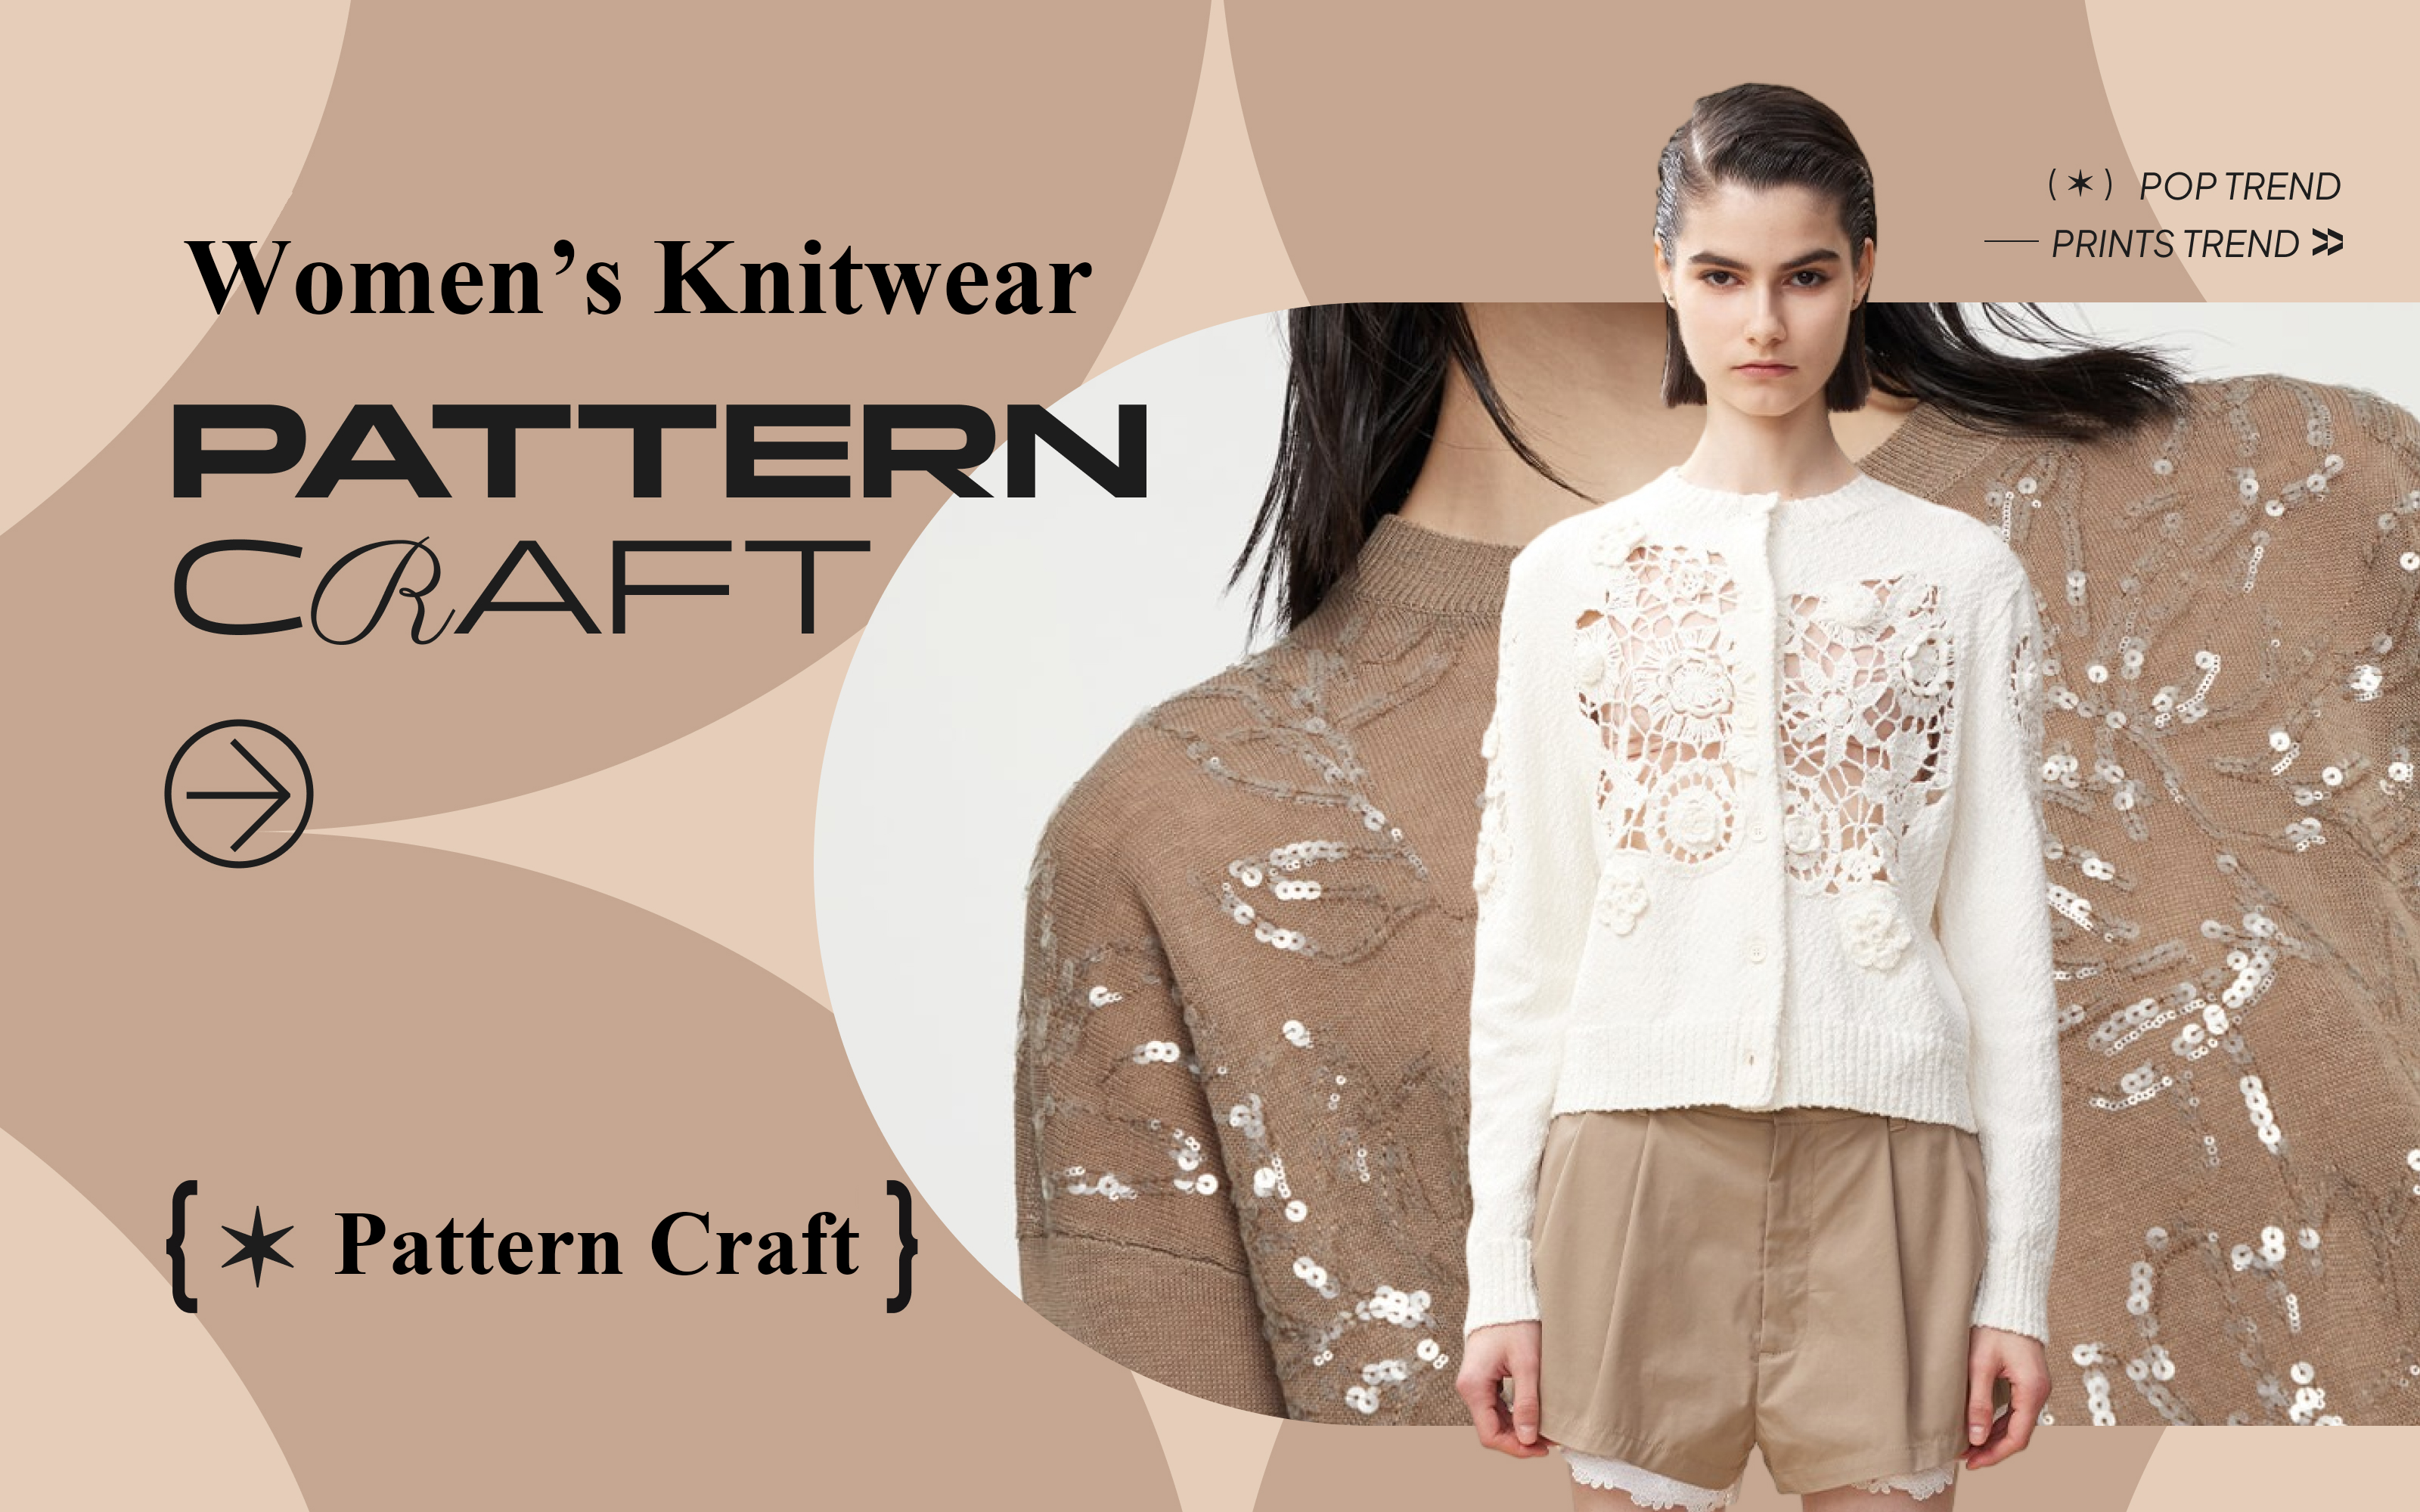 Mature Sweater -- The Pattern Craft Trend for Womenswear